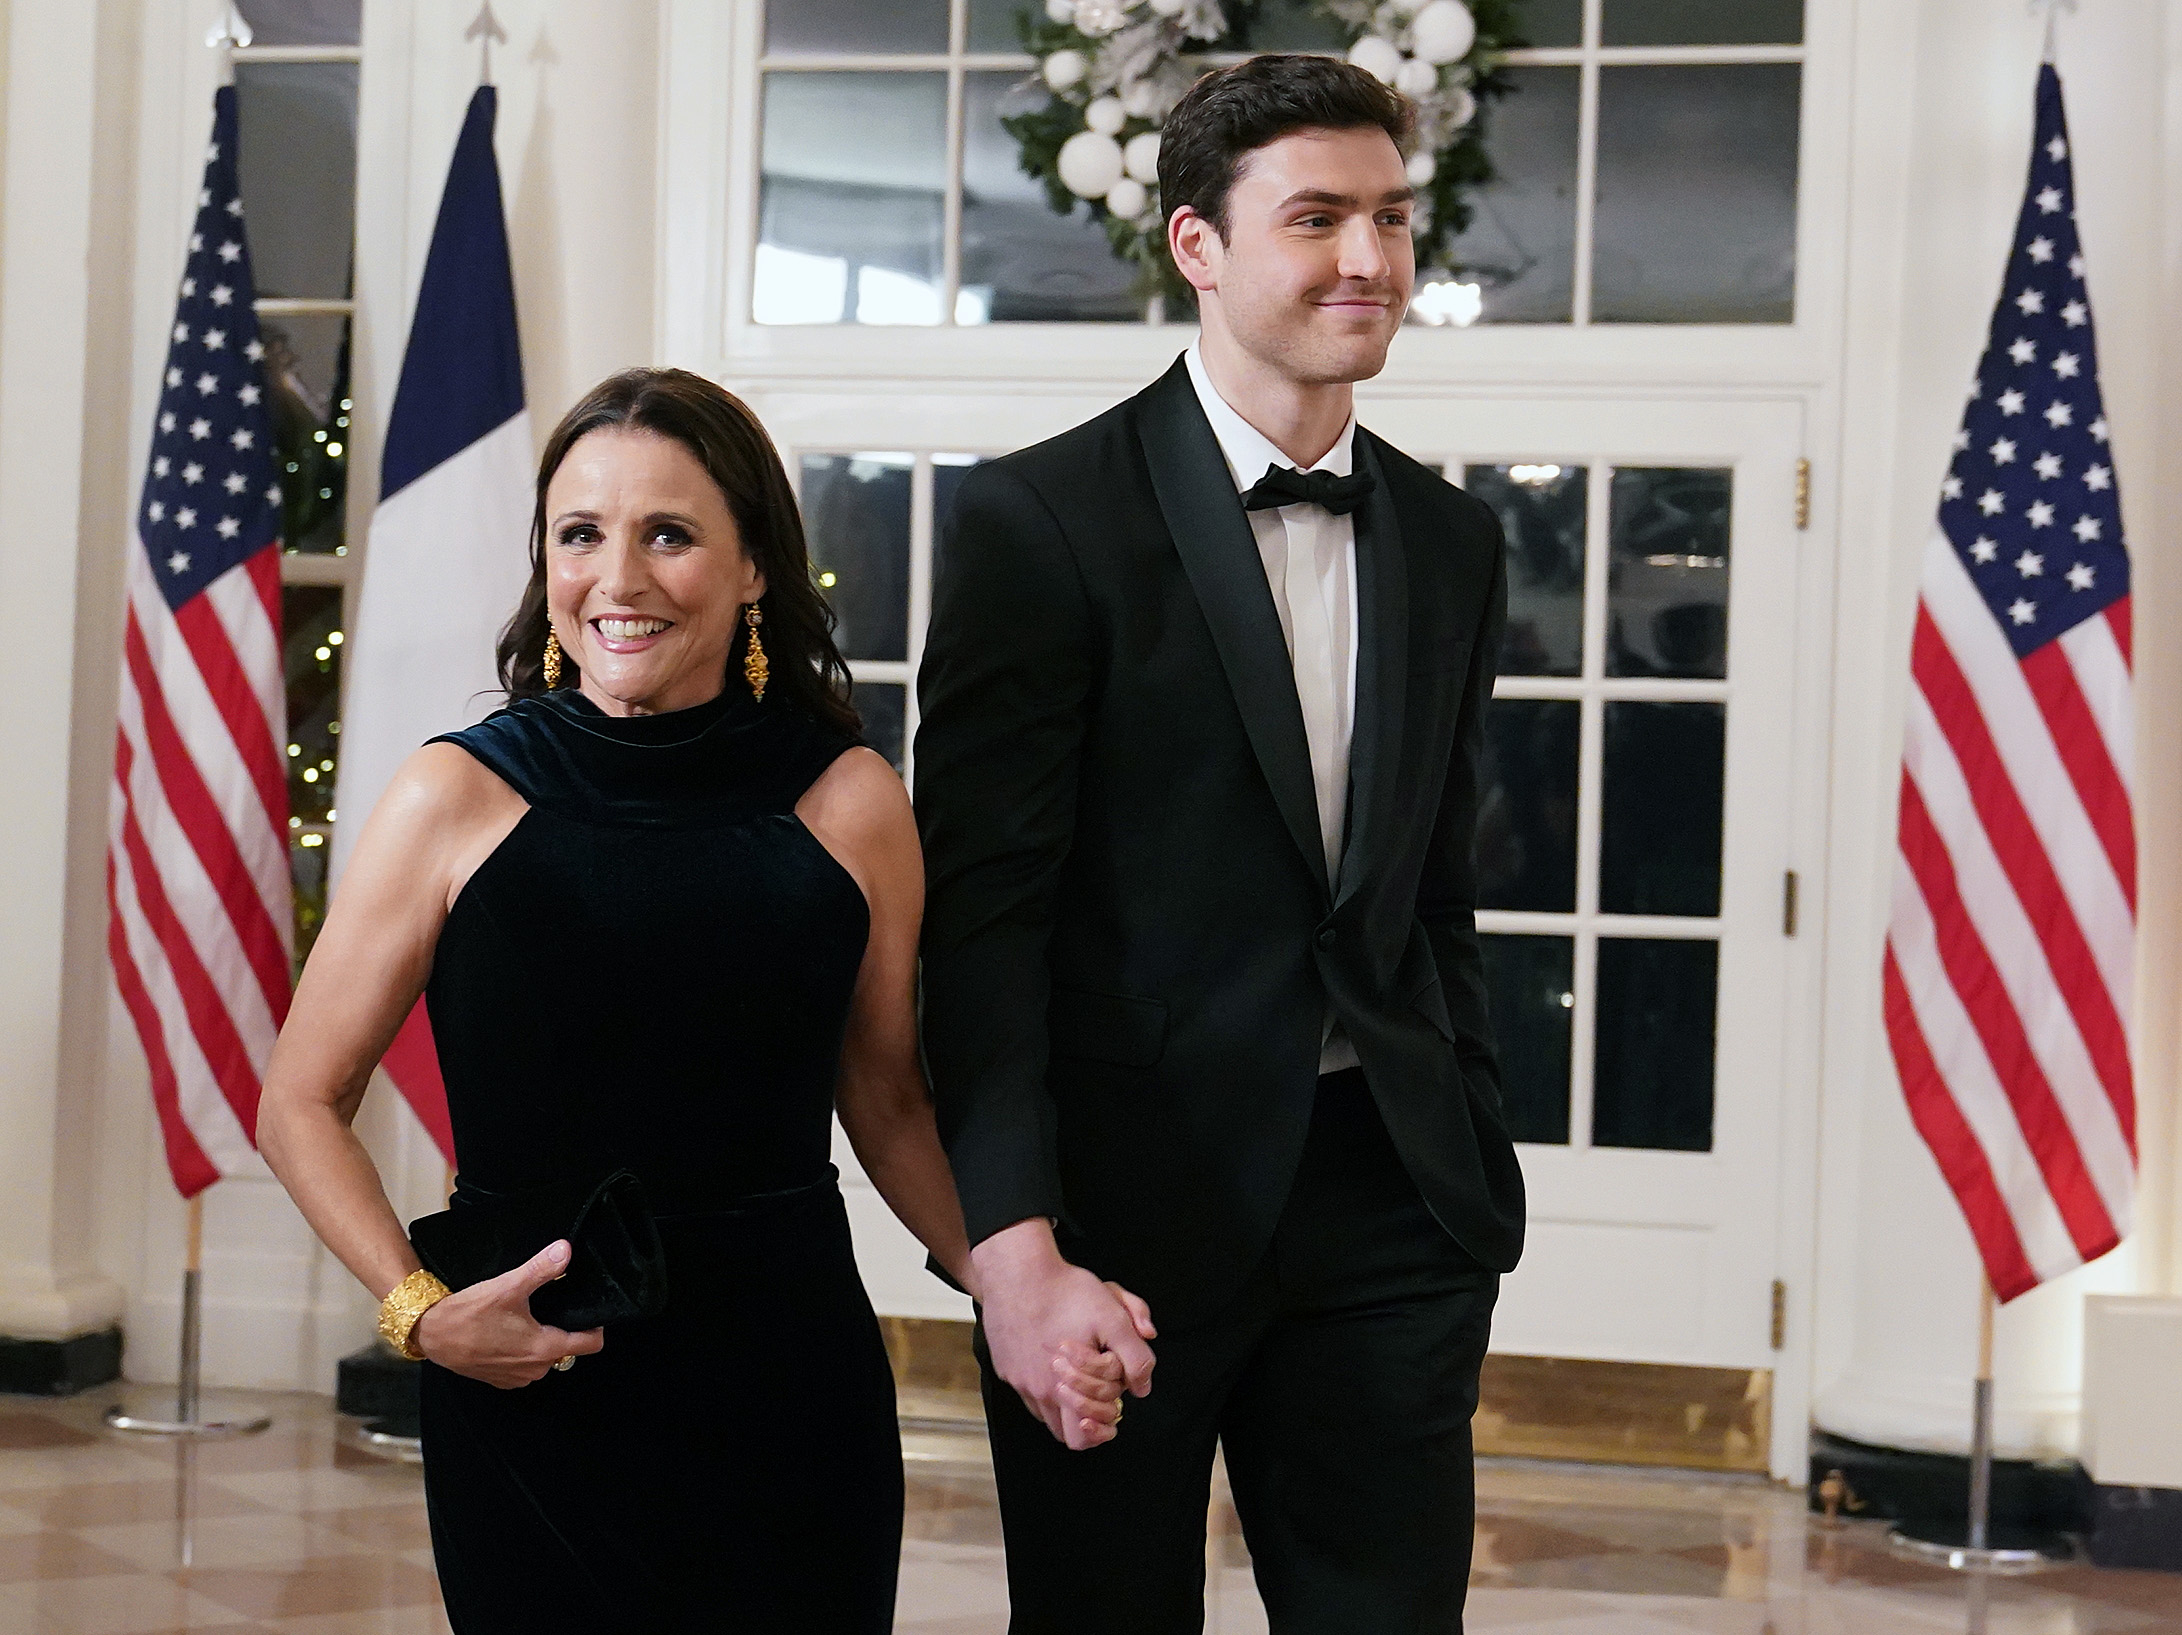 Charlie in a tux and Julia in a black dress as they walk into the White House